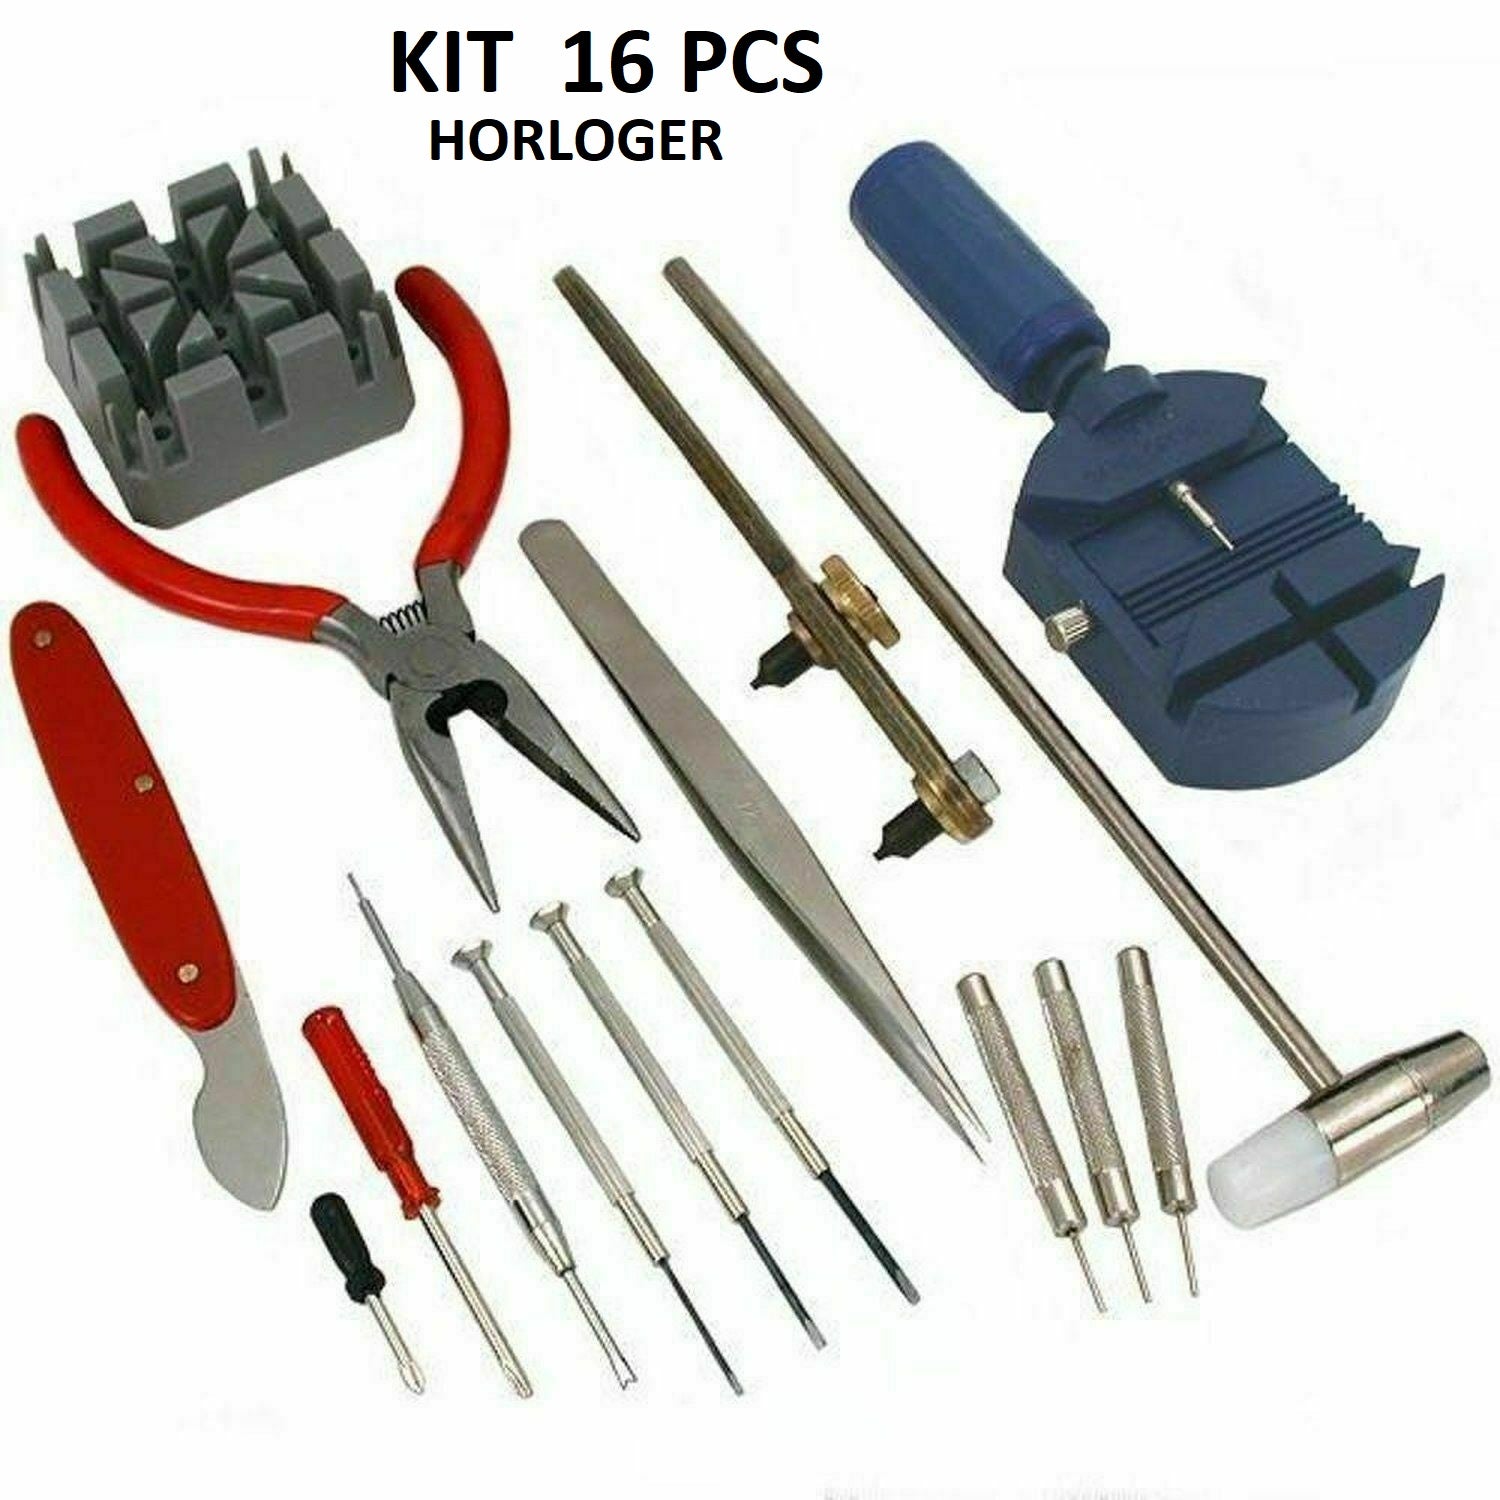 Kit 16 pieces outils reparation horloger neuf